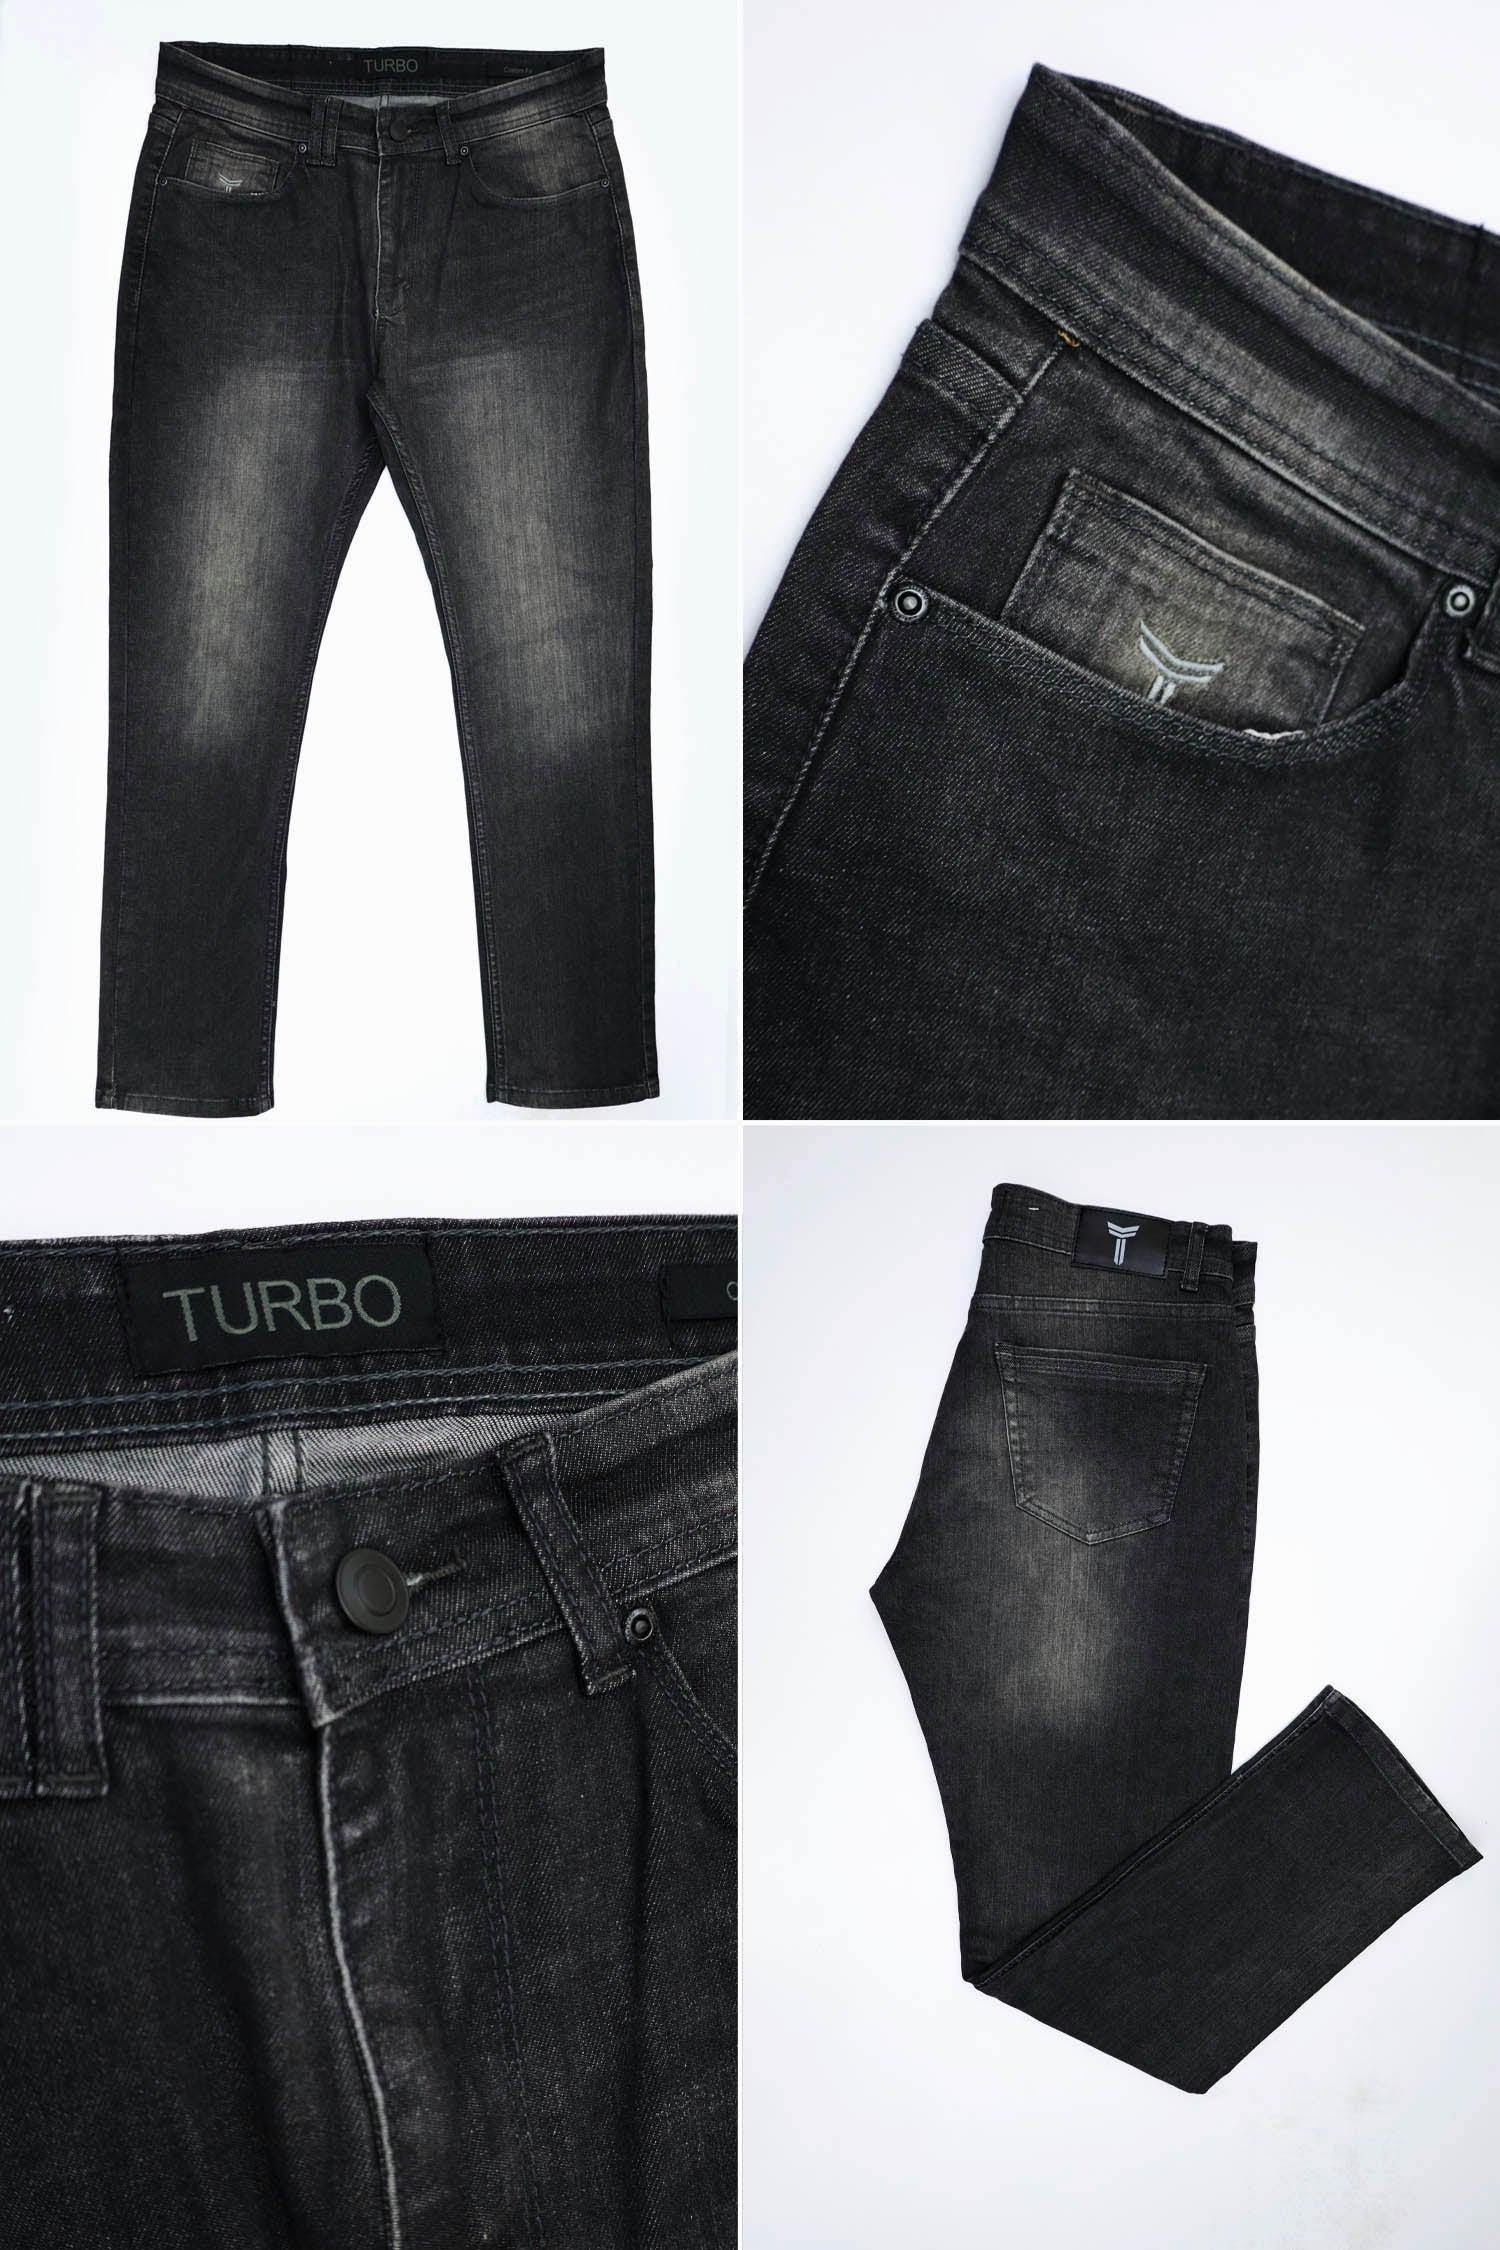 Light Faded Slim Fit Turbo Jeans In Charcoal